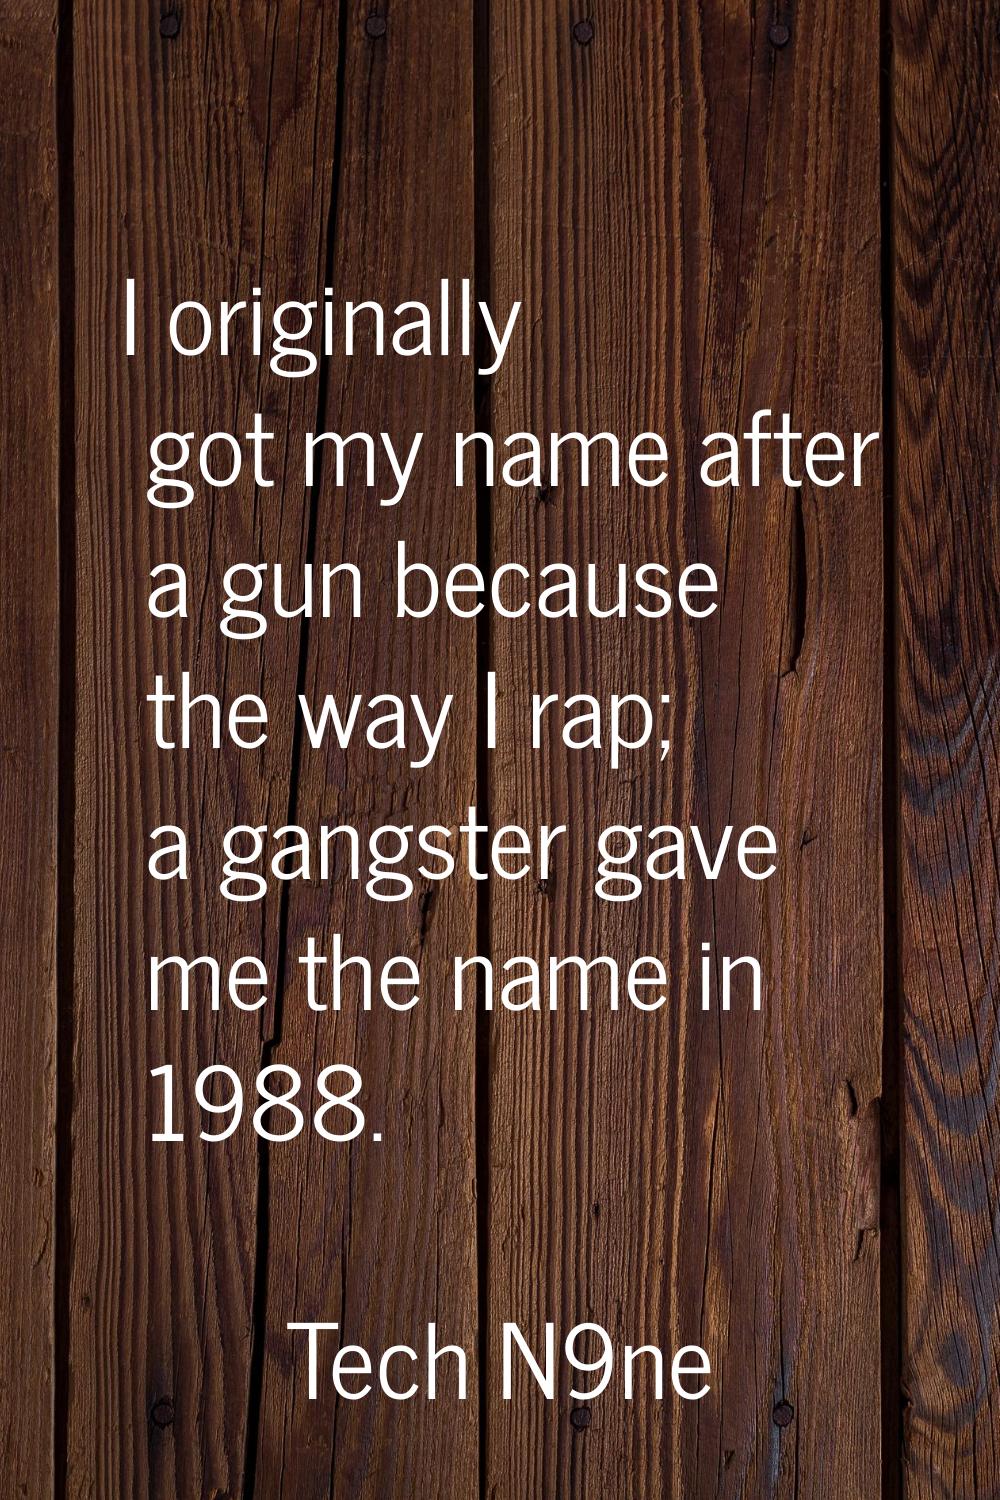 I originally got my name after a gun because the way I rap; a gangster gave me the name in 1988.